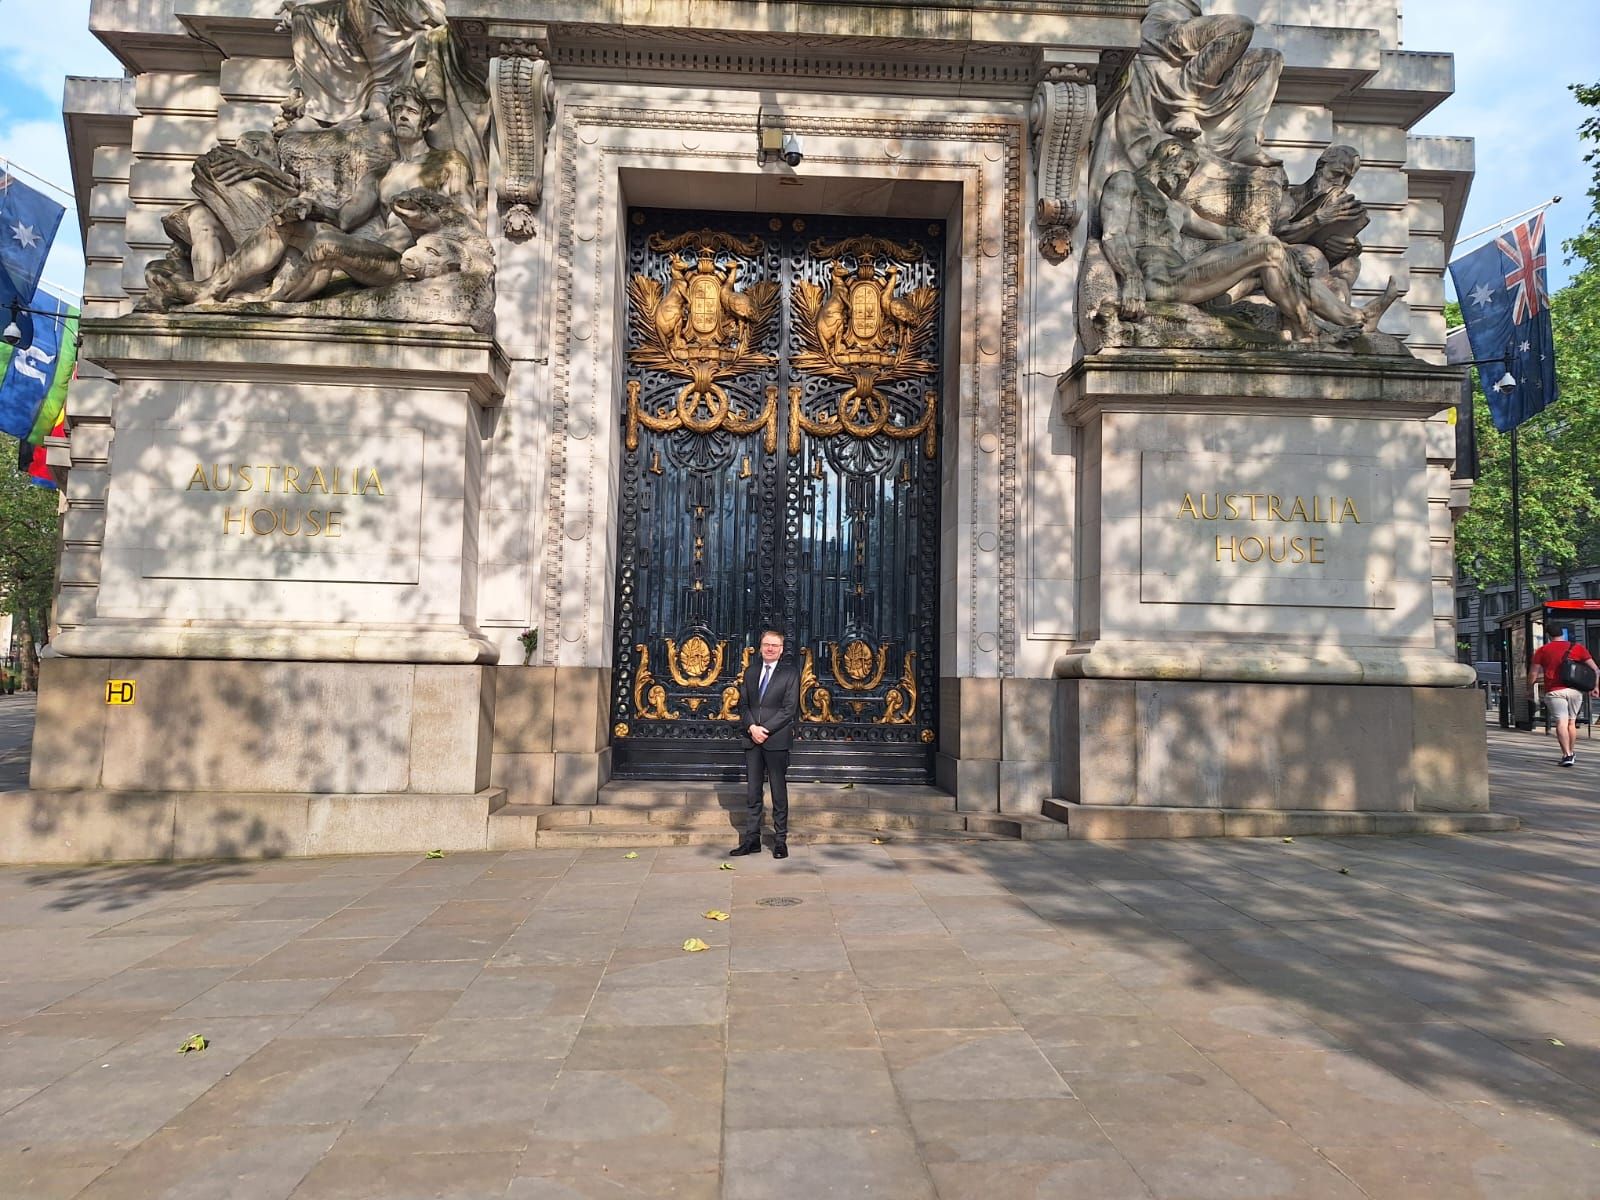 IOI President, Chris Field PSM, at the front entrance to Australia House in London.